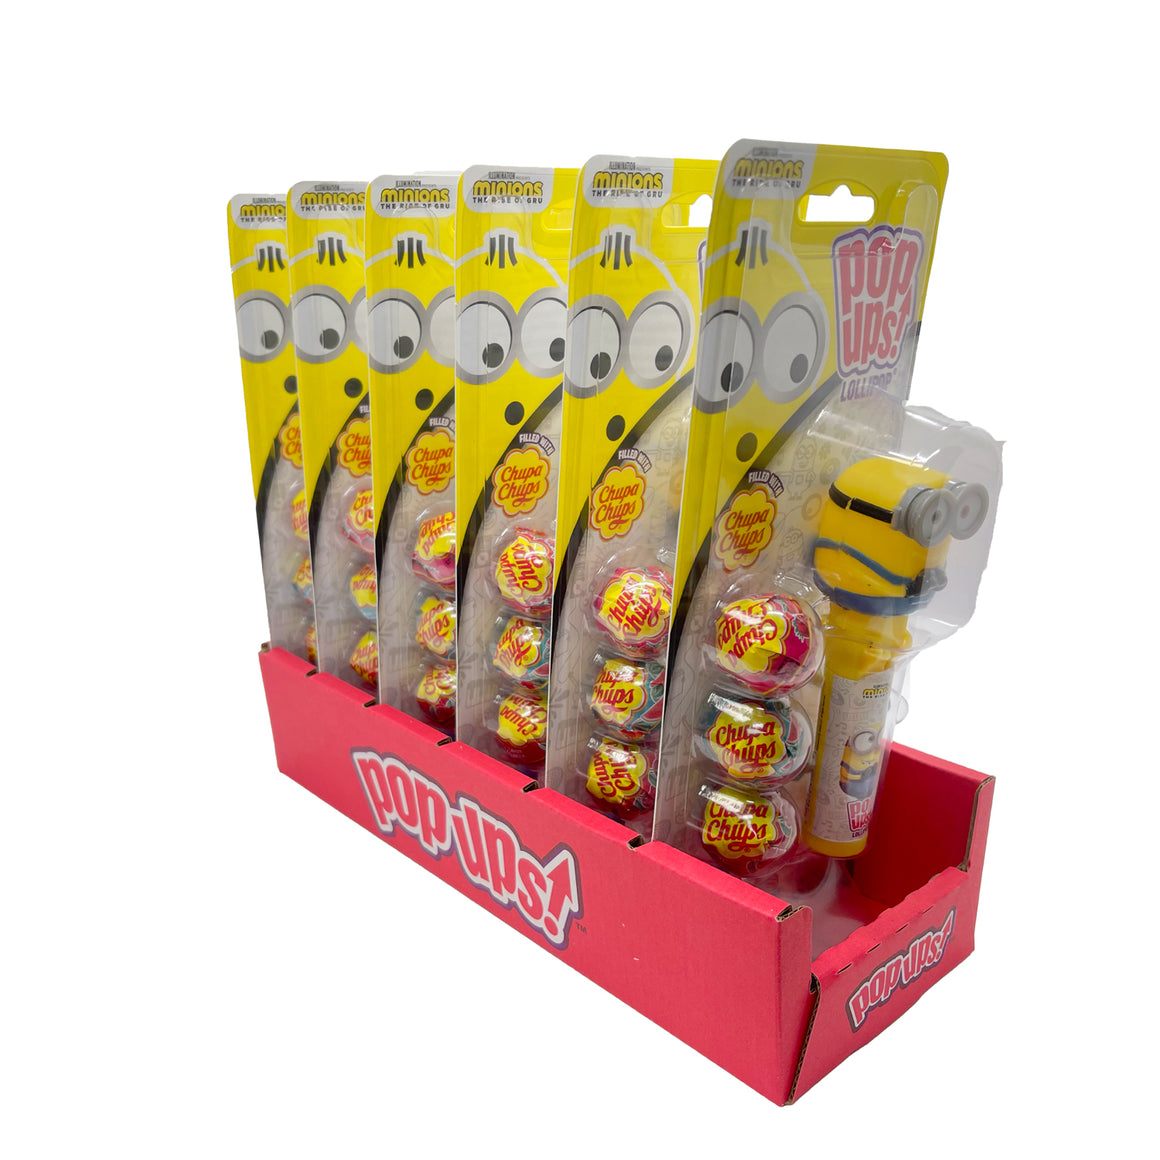 All City Candy Flix Pop ups! Minions Blister Card 1.26 oz. Bob Novelty Flix Candy For fresh candy and great service, visit www.allcitycandy.com